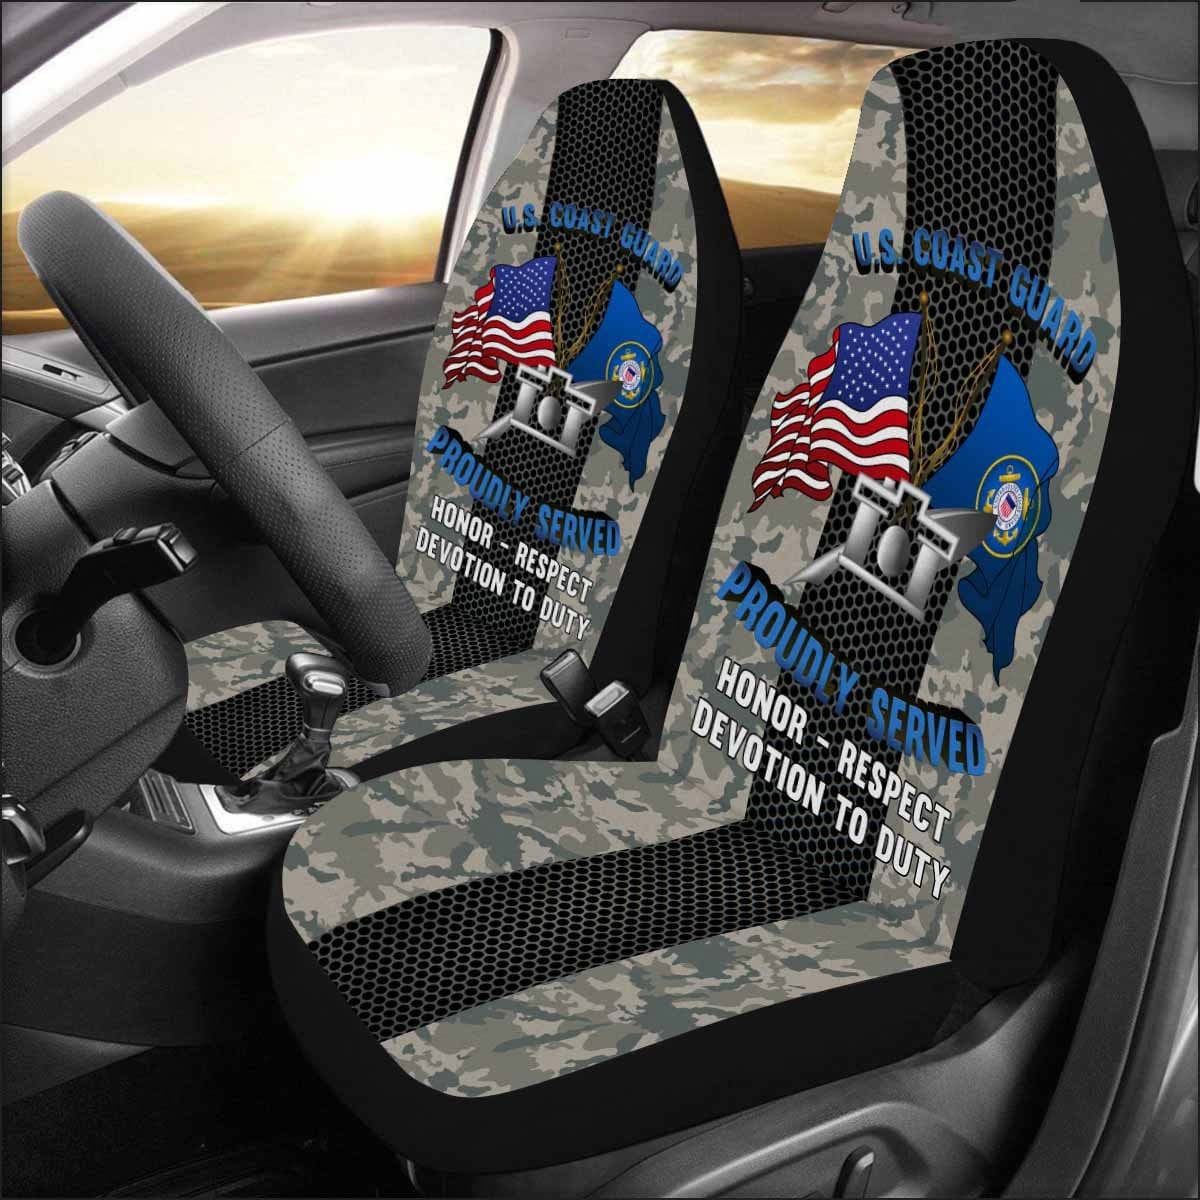 USCG PUBLIC AFFAIRS SPECIALIST PA Logo Proudly Served Car Seat Covers (Set of 2)-SeatCovers-USCG-Rate-Veterans Nation